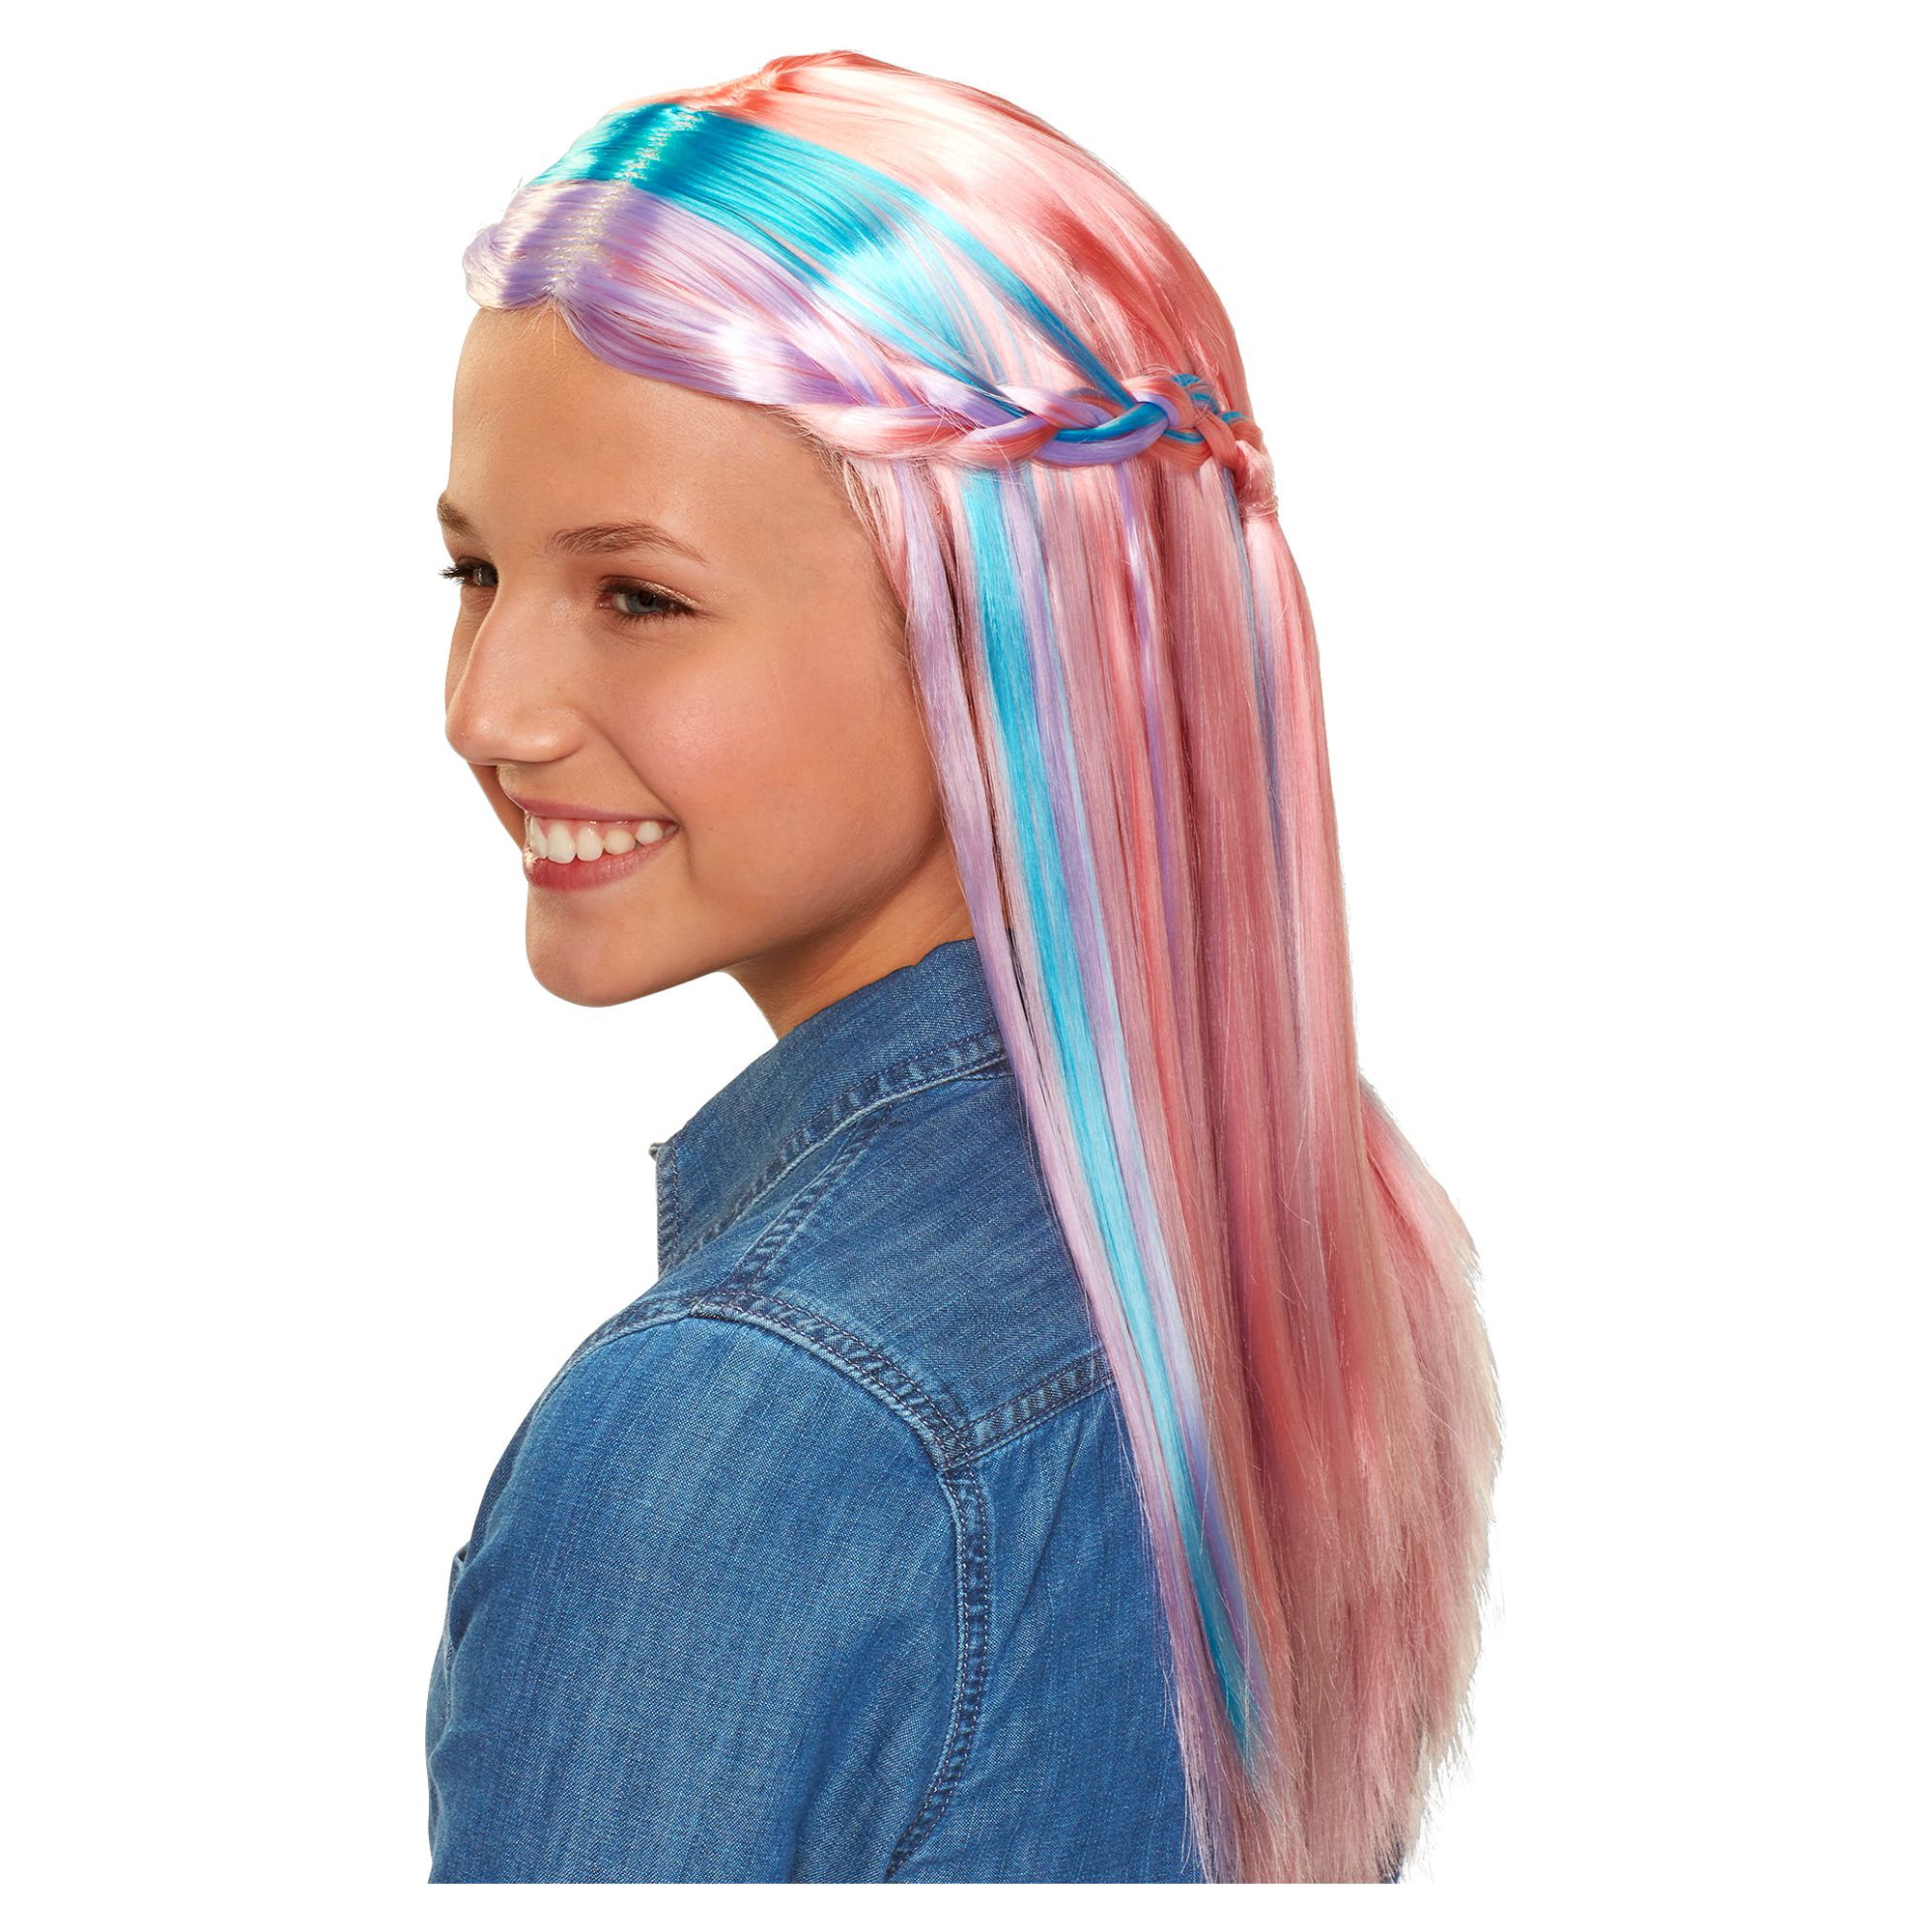 CGH Cute Girls Hairstyles! Wig with Styling Head - Straight Multi-Color Hair - image 3 of 10